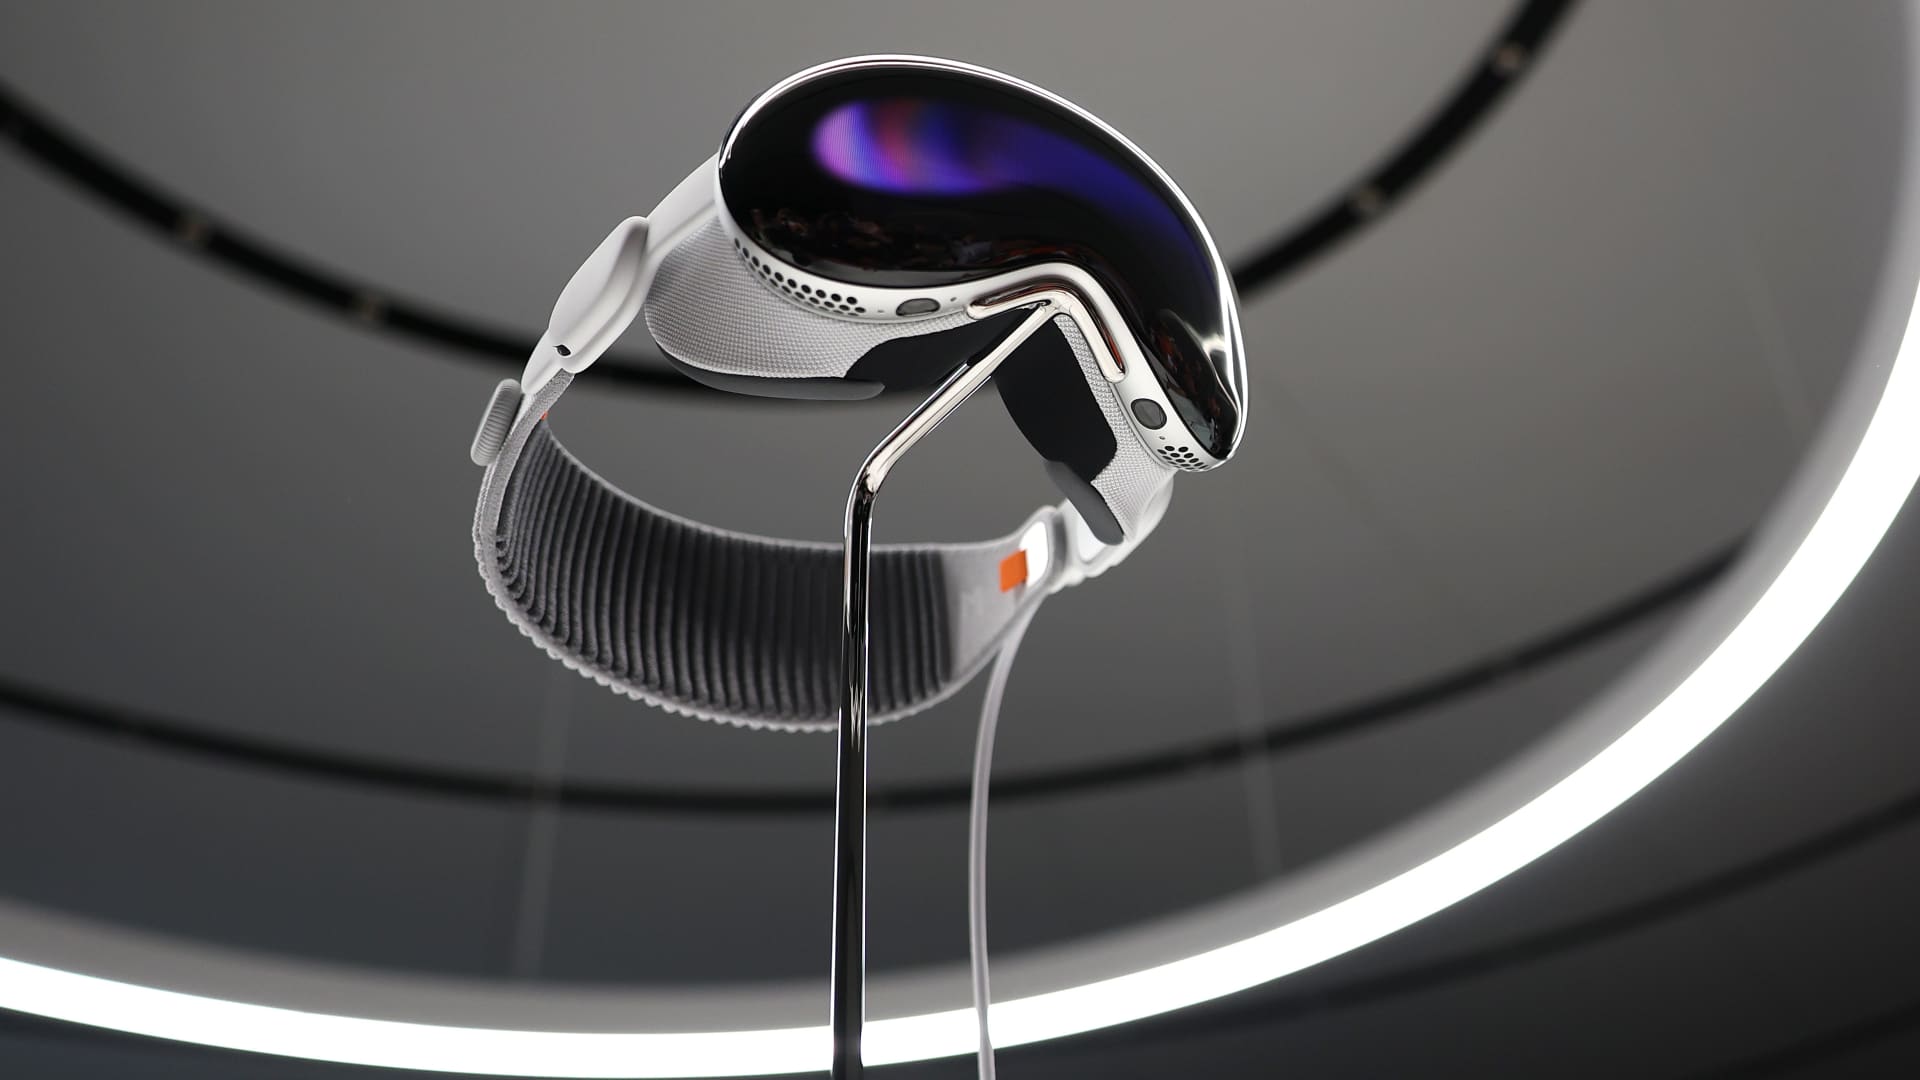 The new Apple Vision Pro headset is displayed during the Apple Worldwide Developers Conference on June 05, 2023 in Cupertino, California.